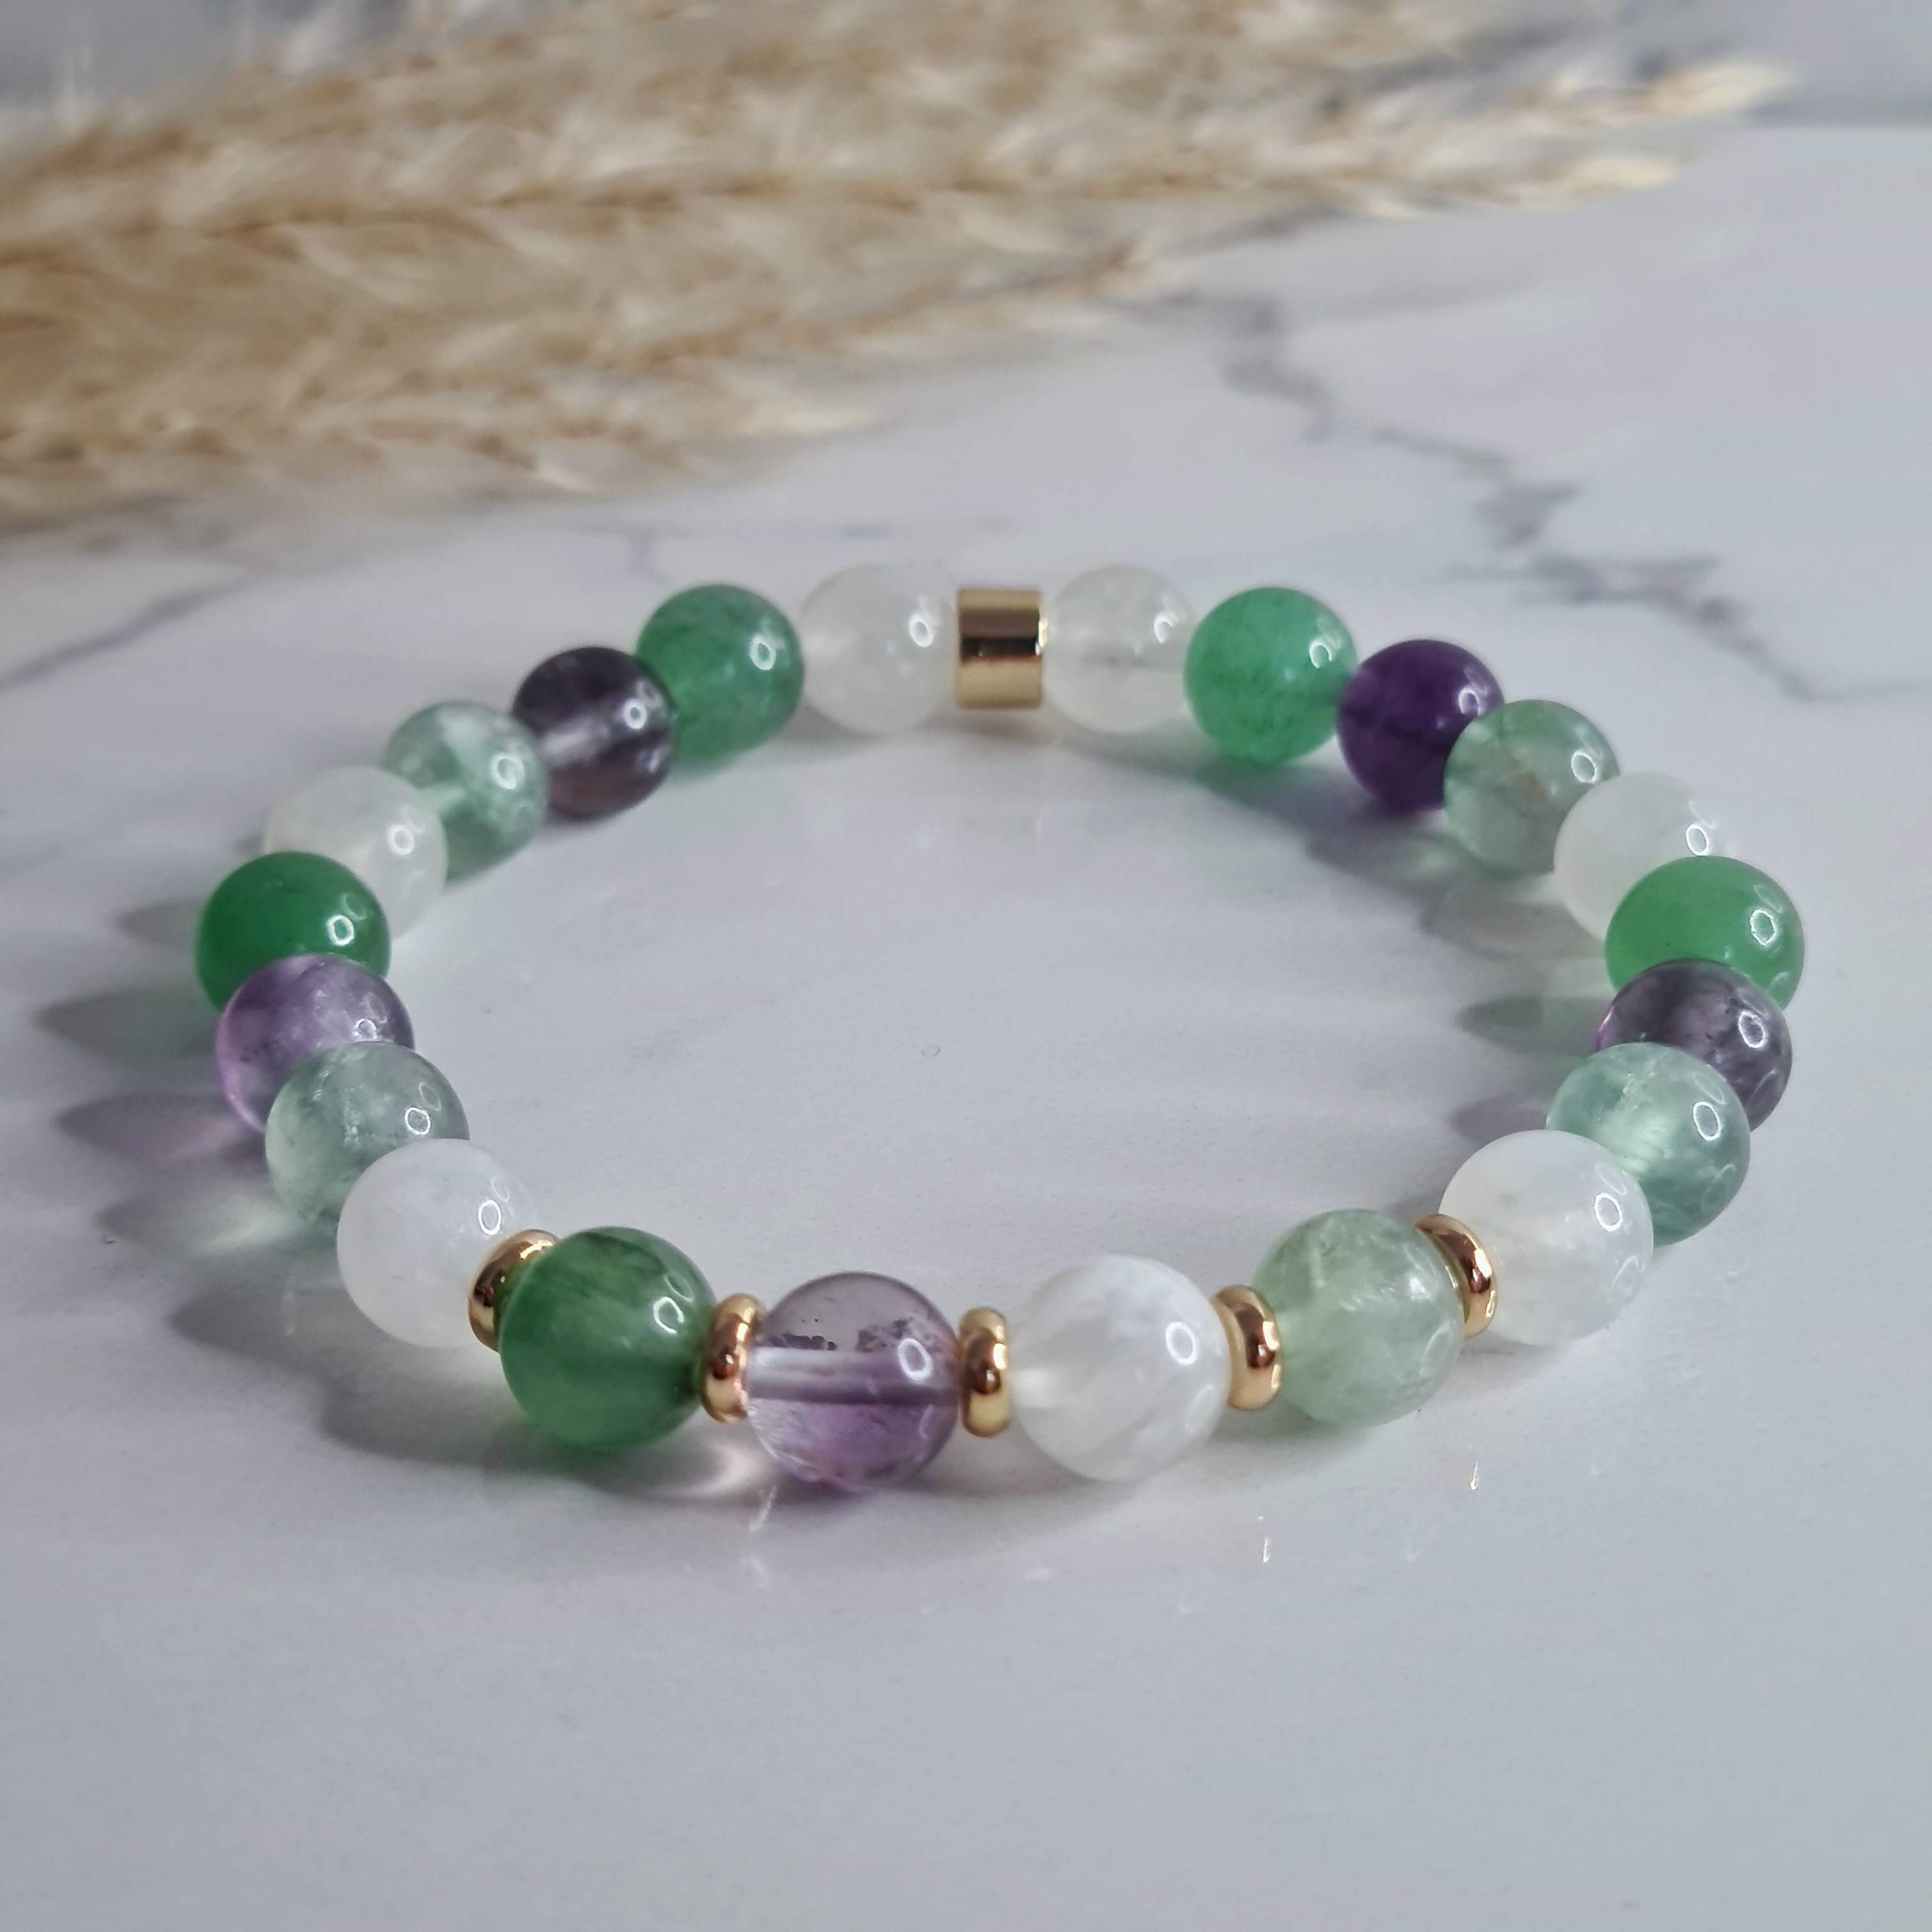 Amethyst, Aventurine and Moonstone 8mm gemstone bracelet with 18ct gold plated accessories